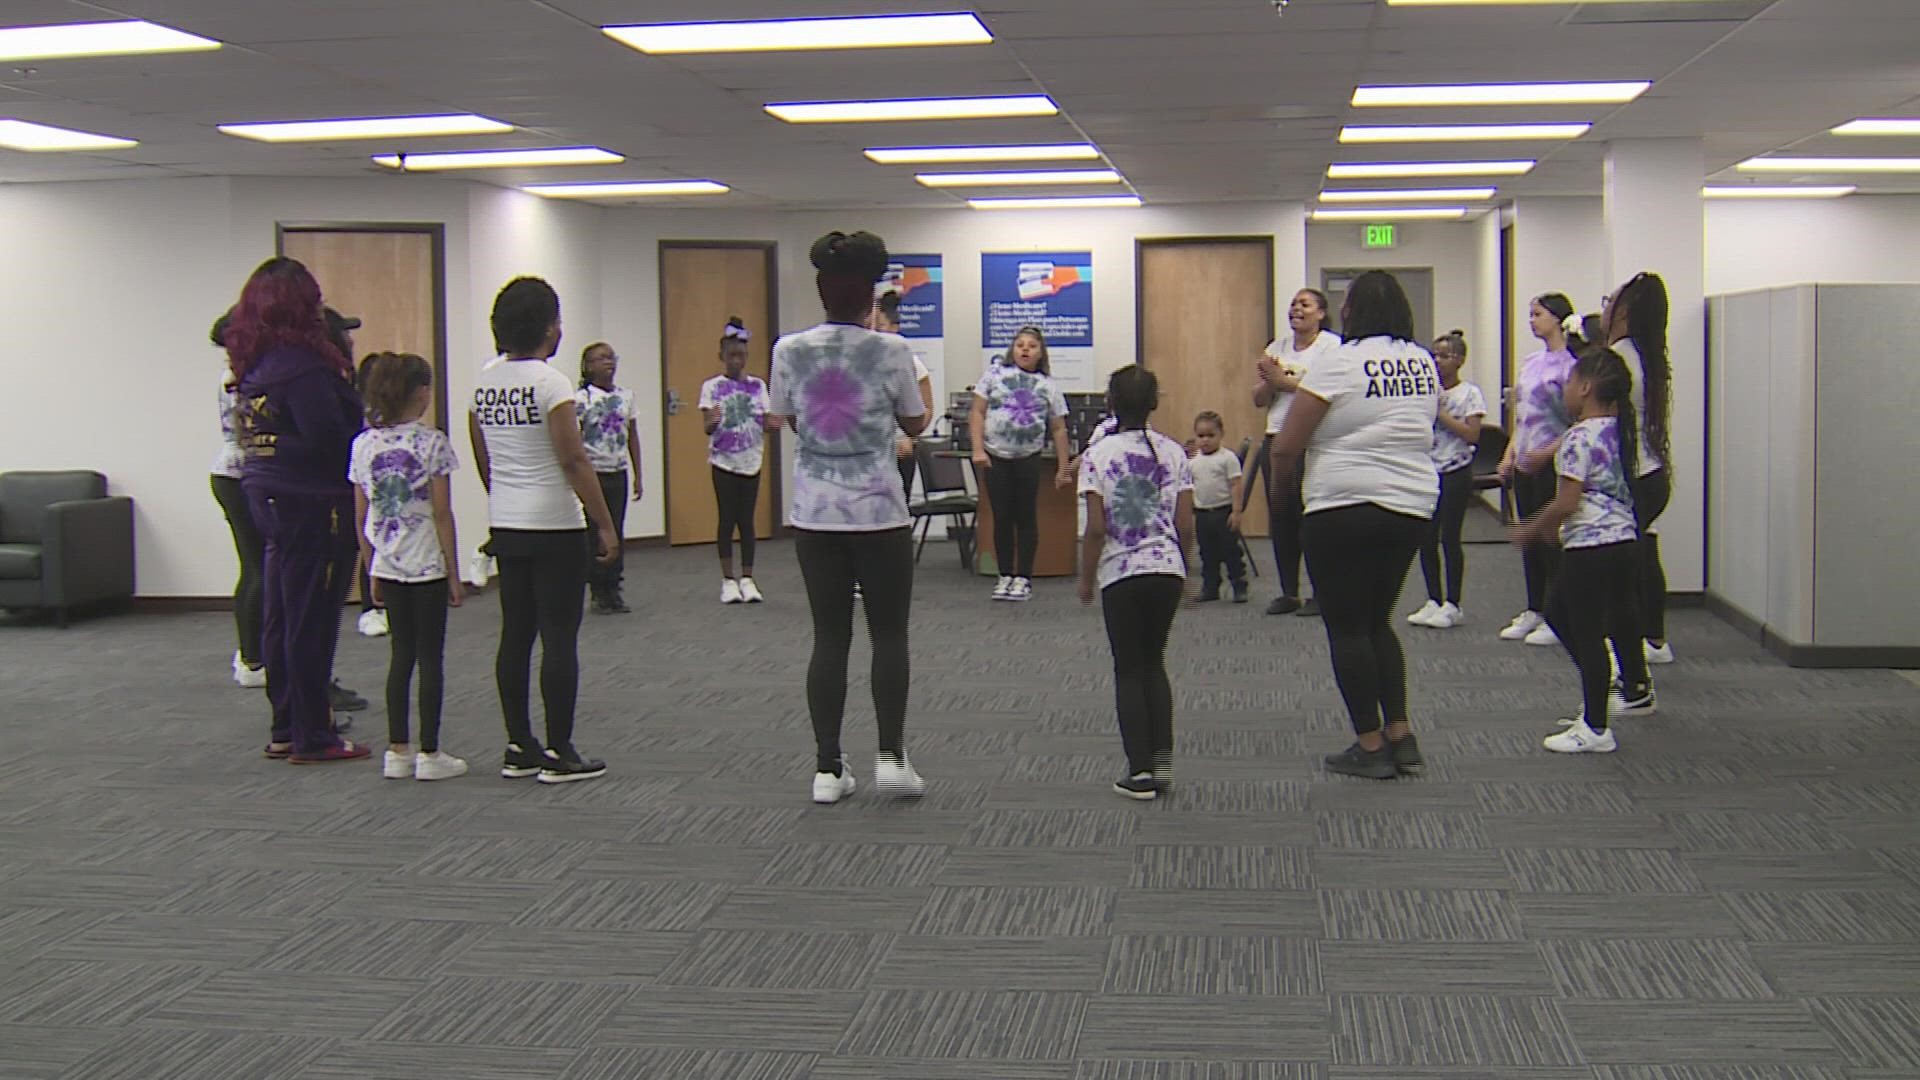 The non-profit youth organization teaches kids the art of step, a dance deeply embedded in Black history.